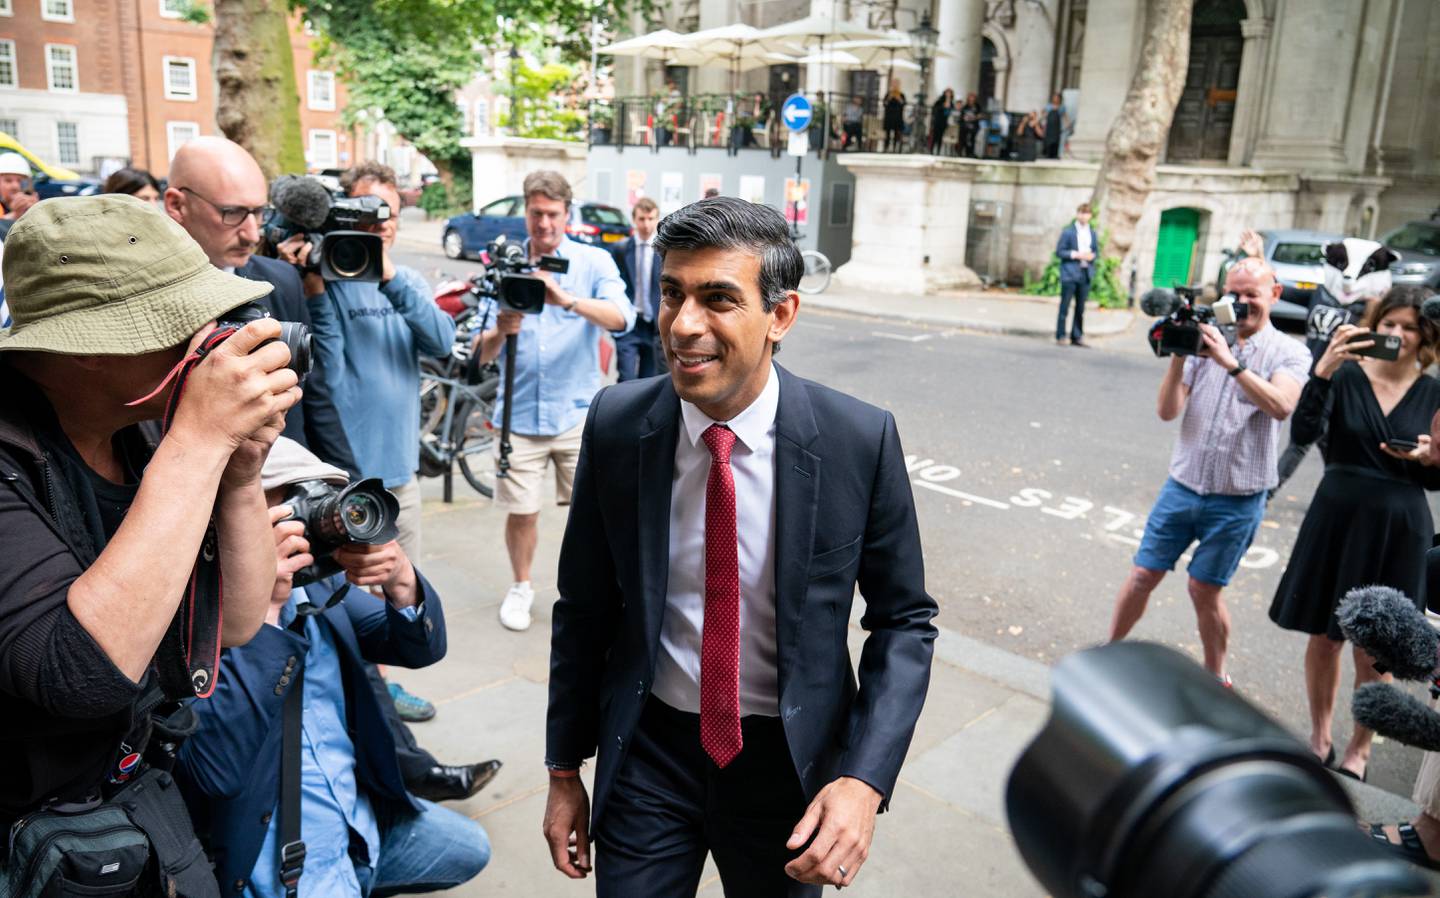 Rishi Sunak arrives for a hustings event in Westminster, central London. PA